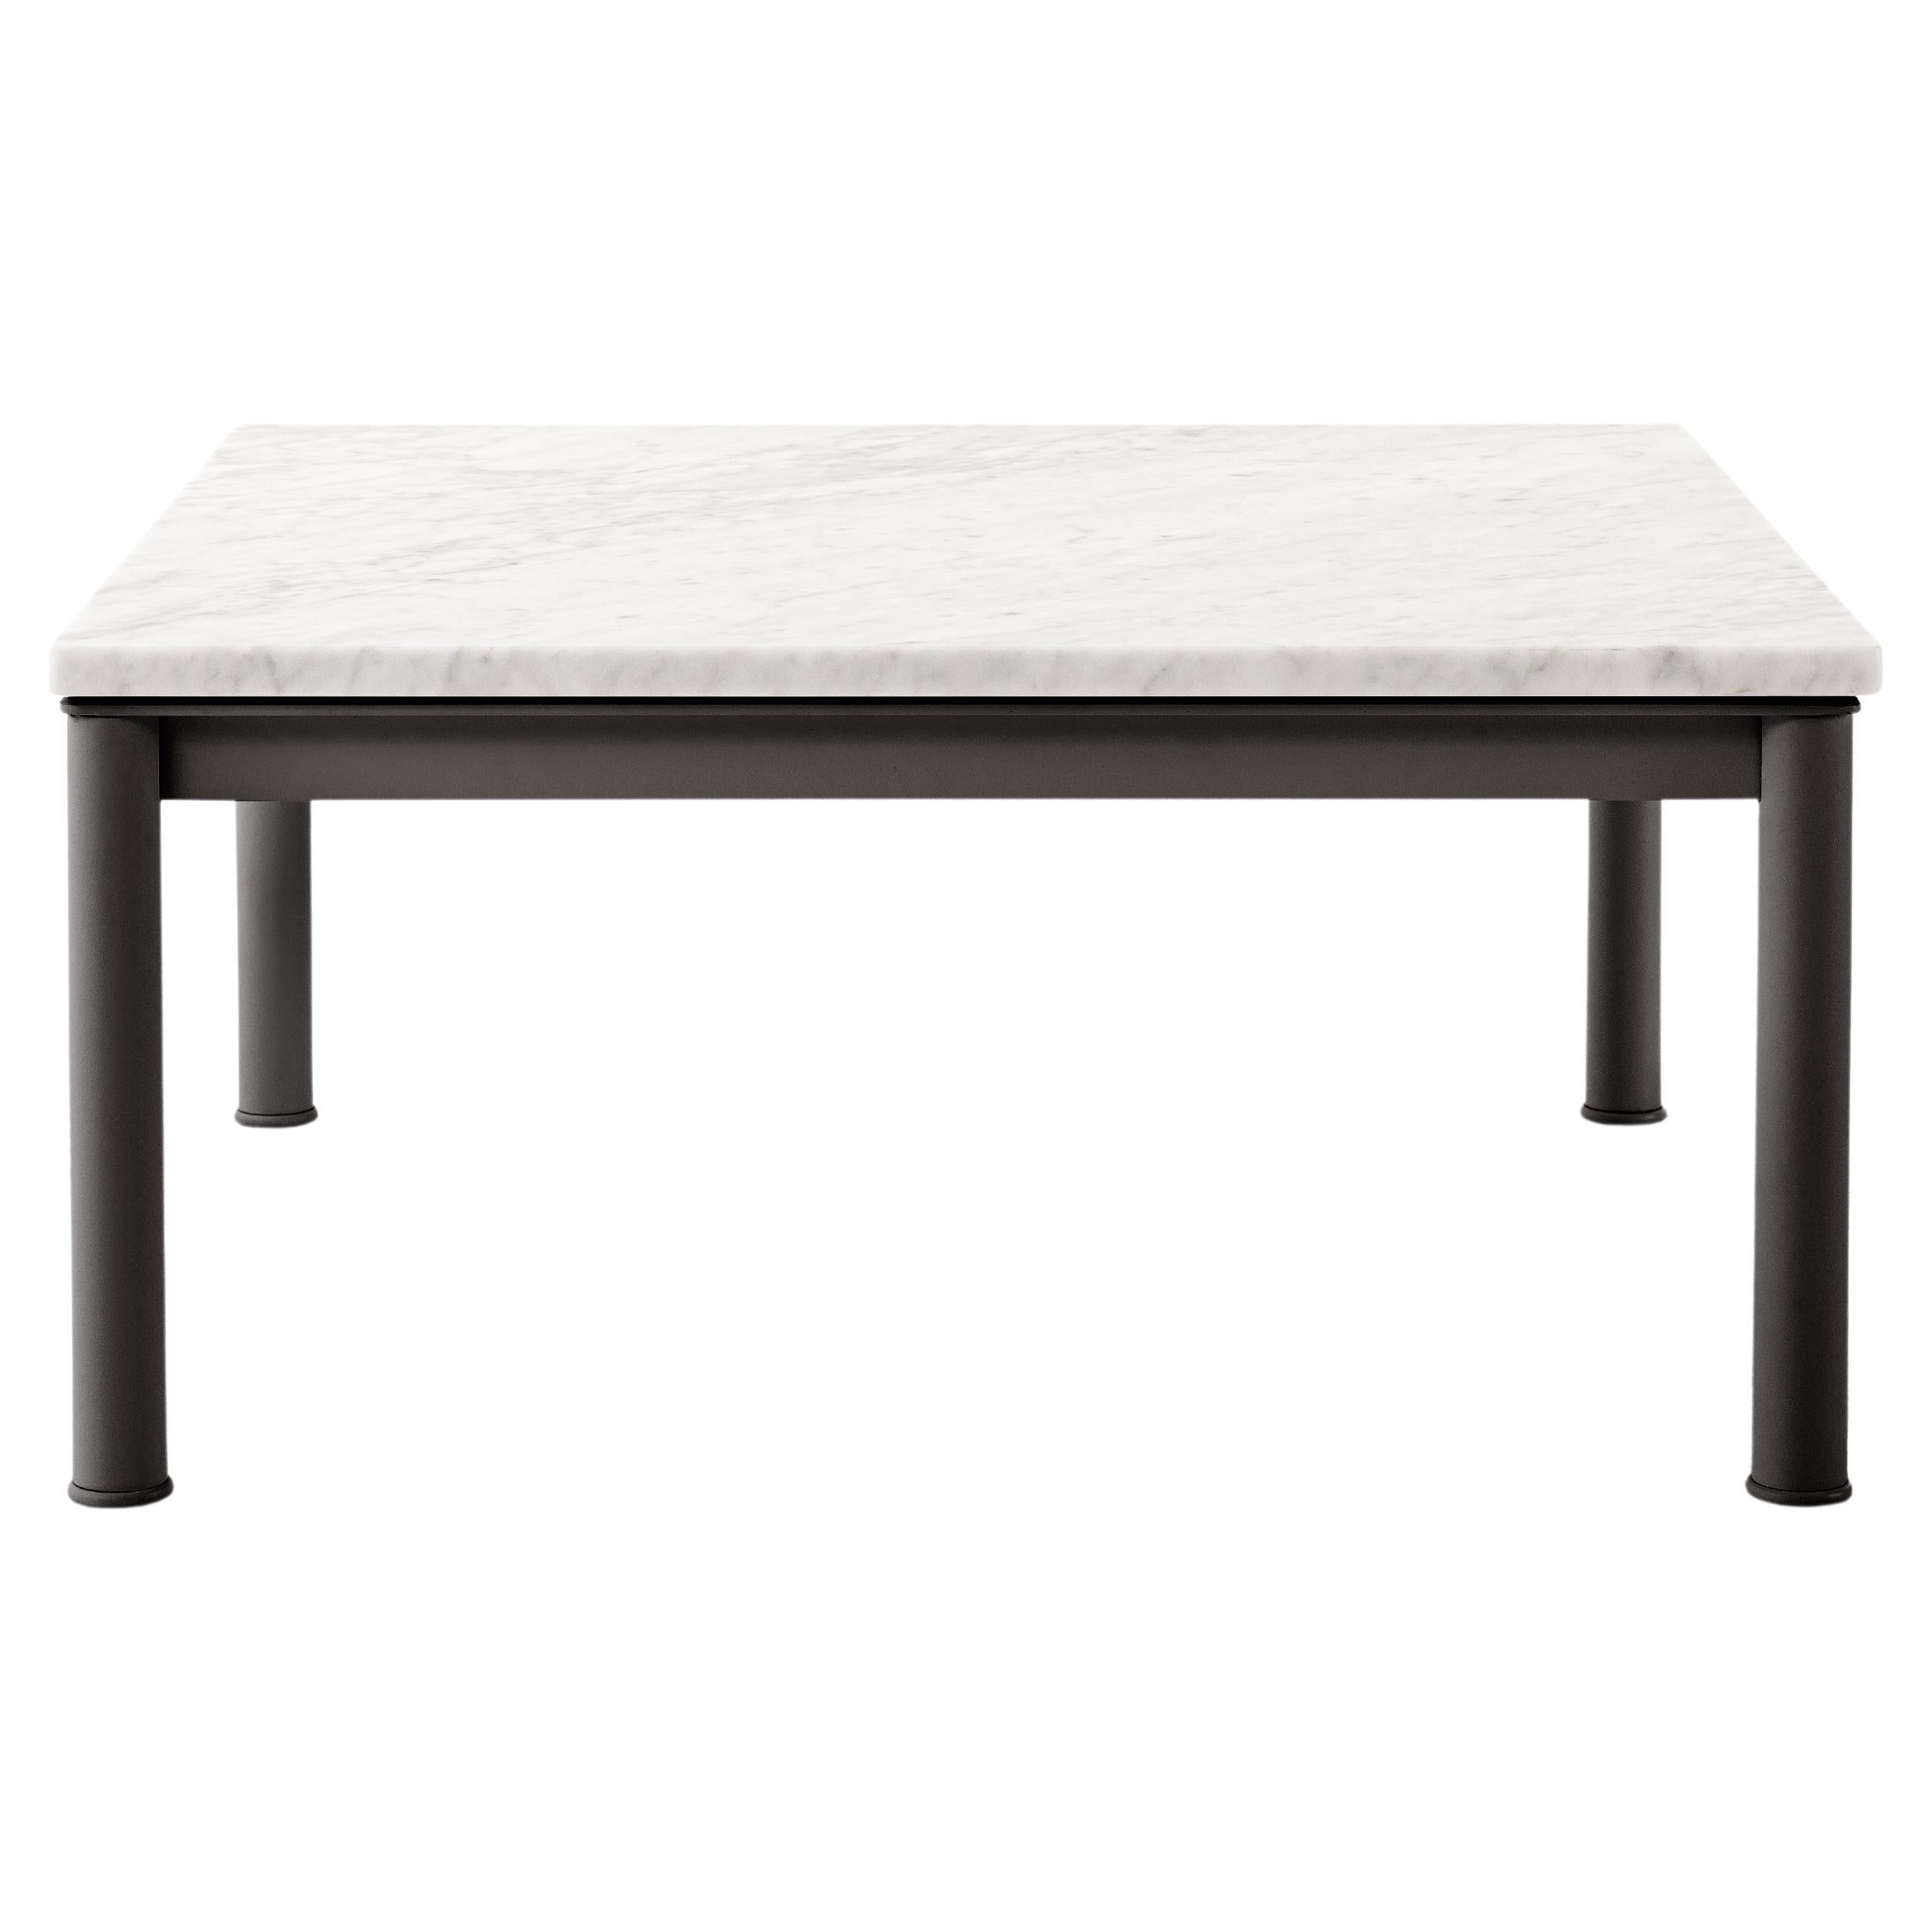 LC10 textured ivory outdoors square table designed by Le Corbusier, Pierre Jeanneret, Charlotte Perriand in 1929. Revisited by Perriand in 1984, and relaunched by Cassina one year later. Manufactured by Cassina in Italy.

Le Corbusier, Charlotte